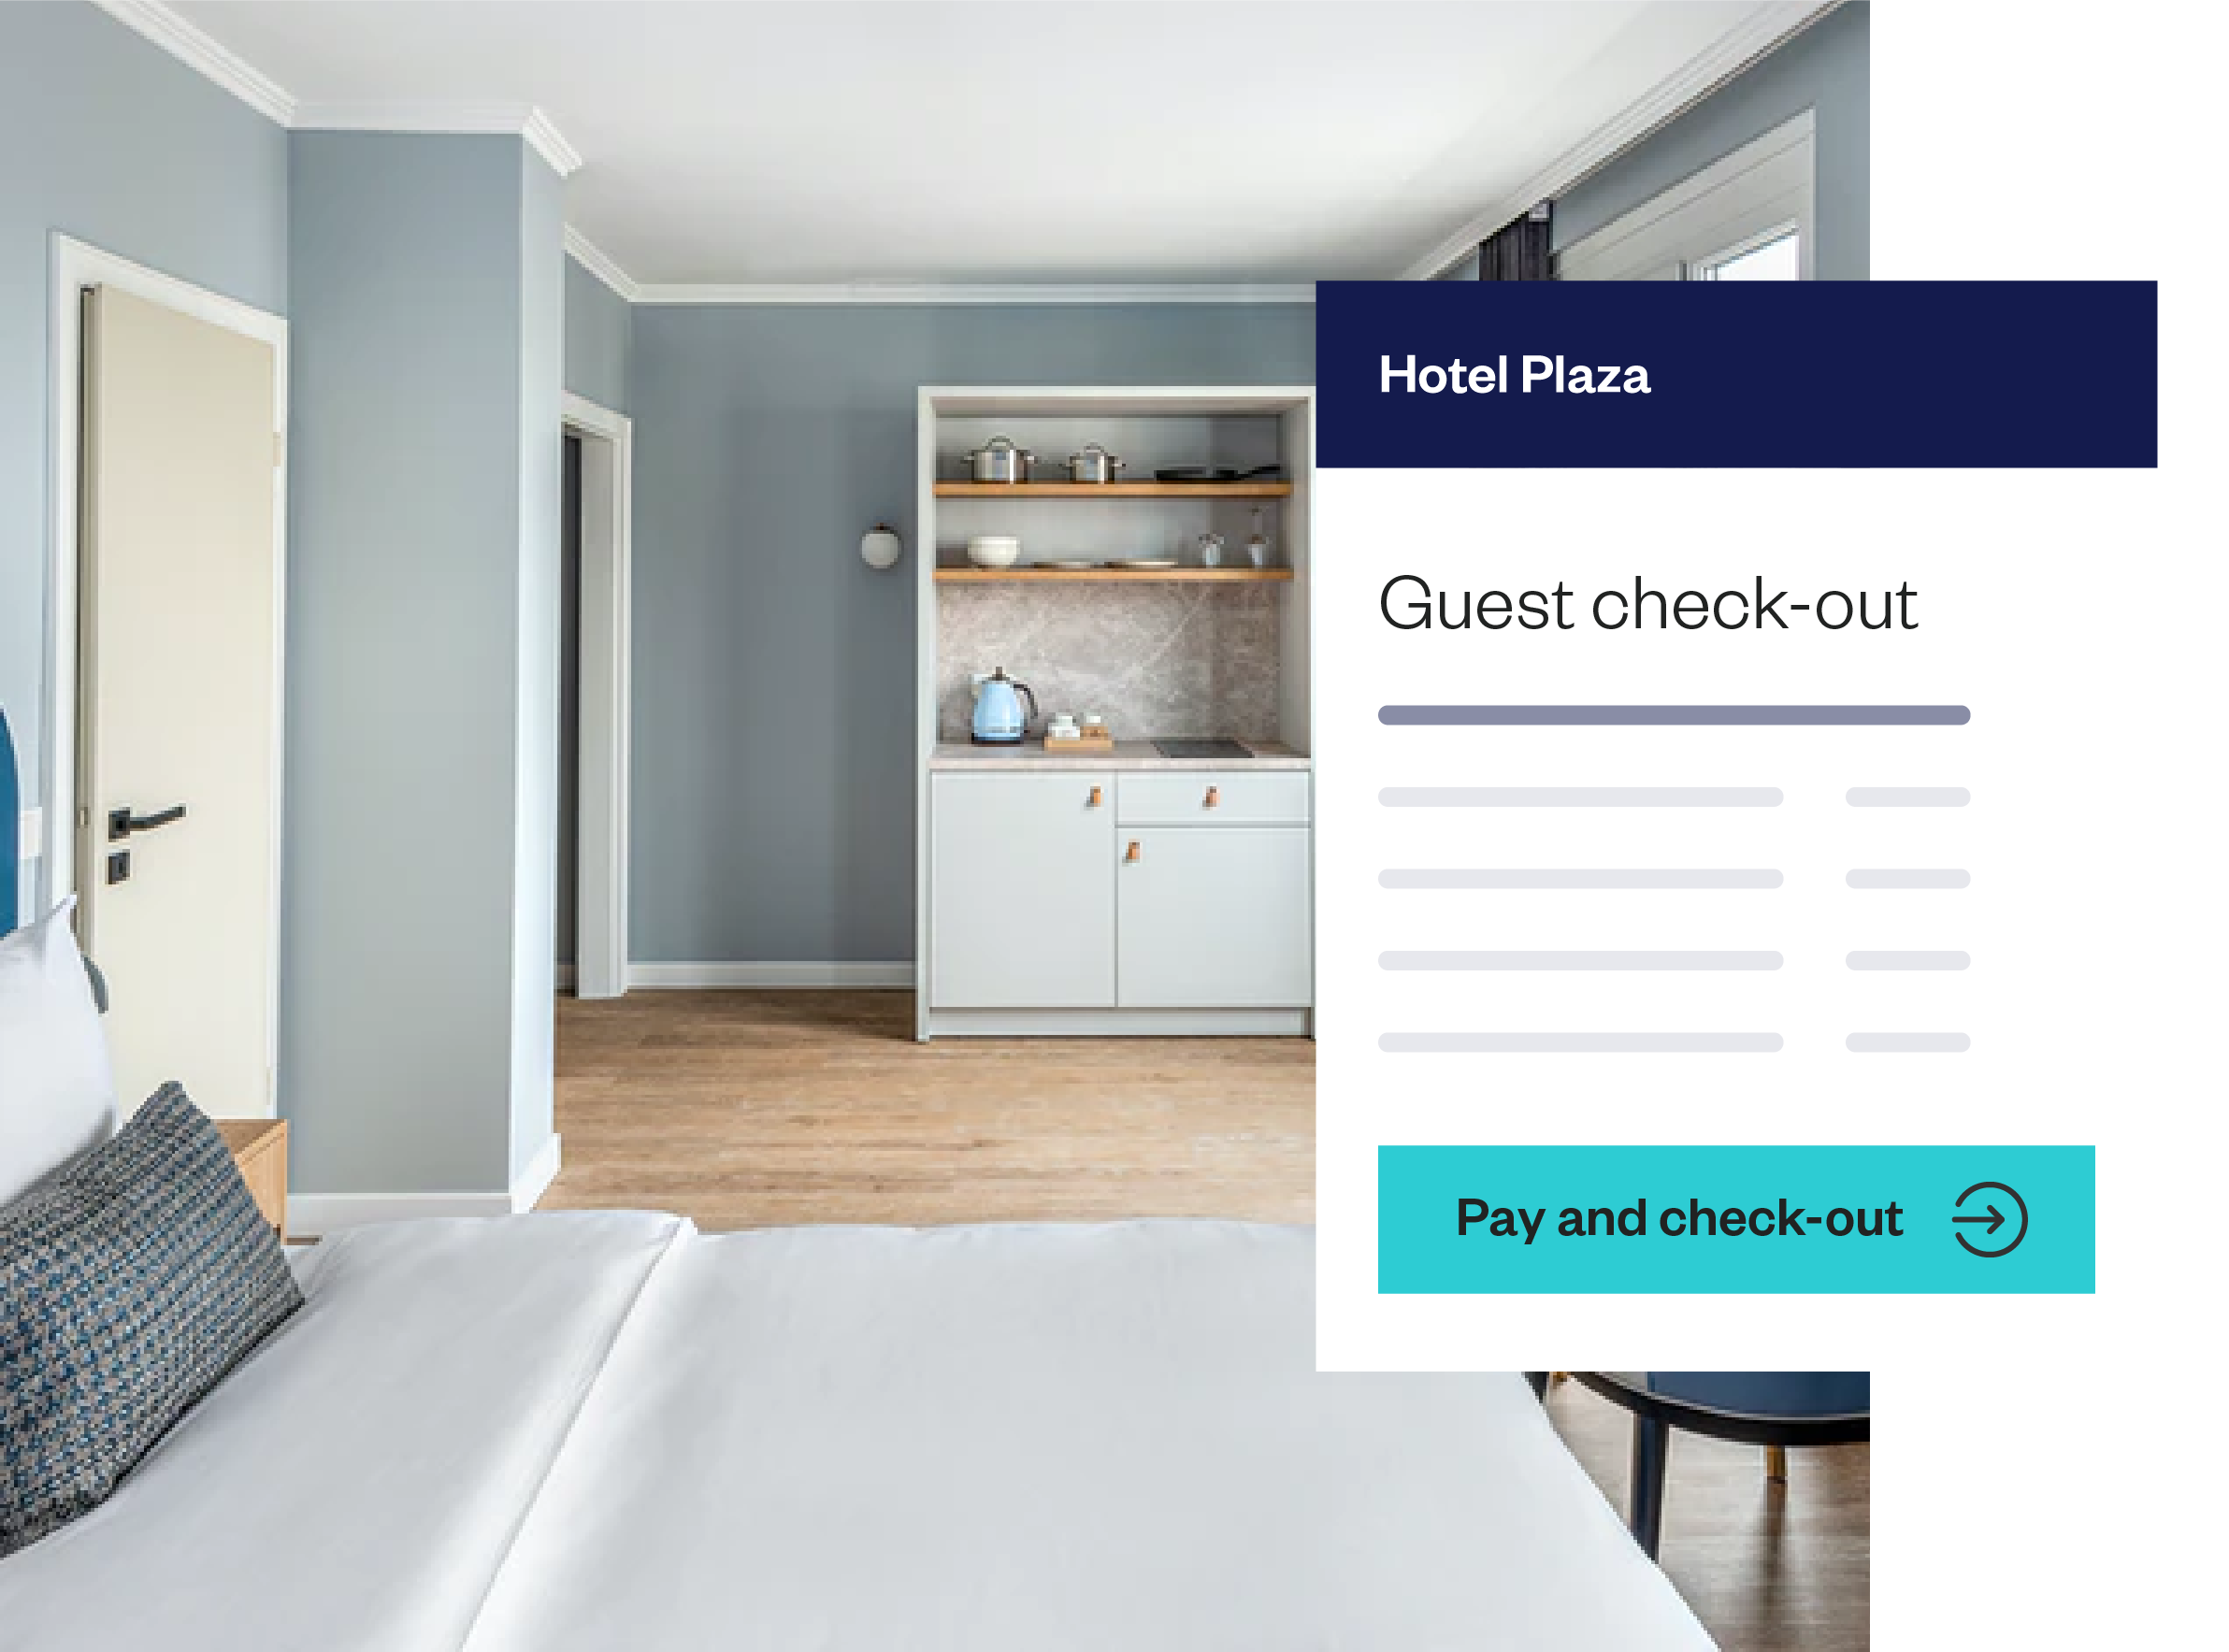 Simplify Check Out to boost Guest Satisfaction